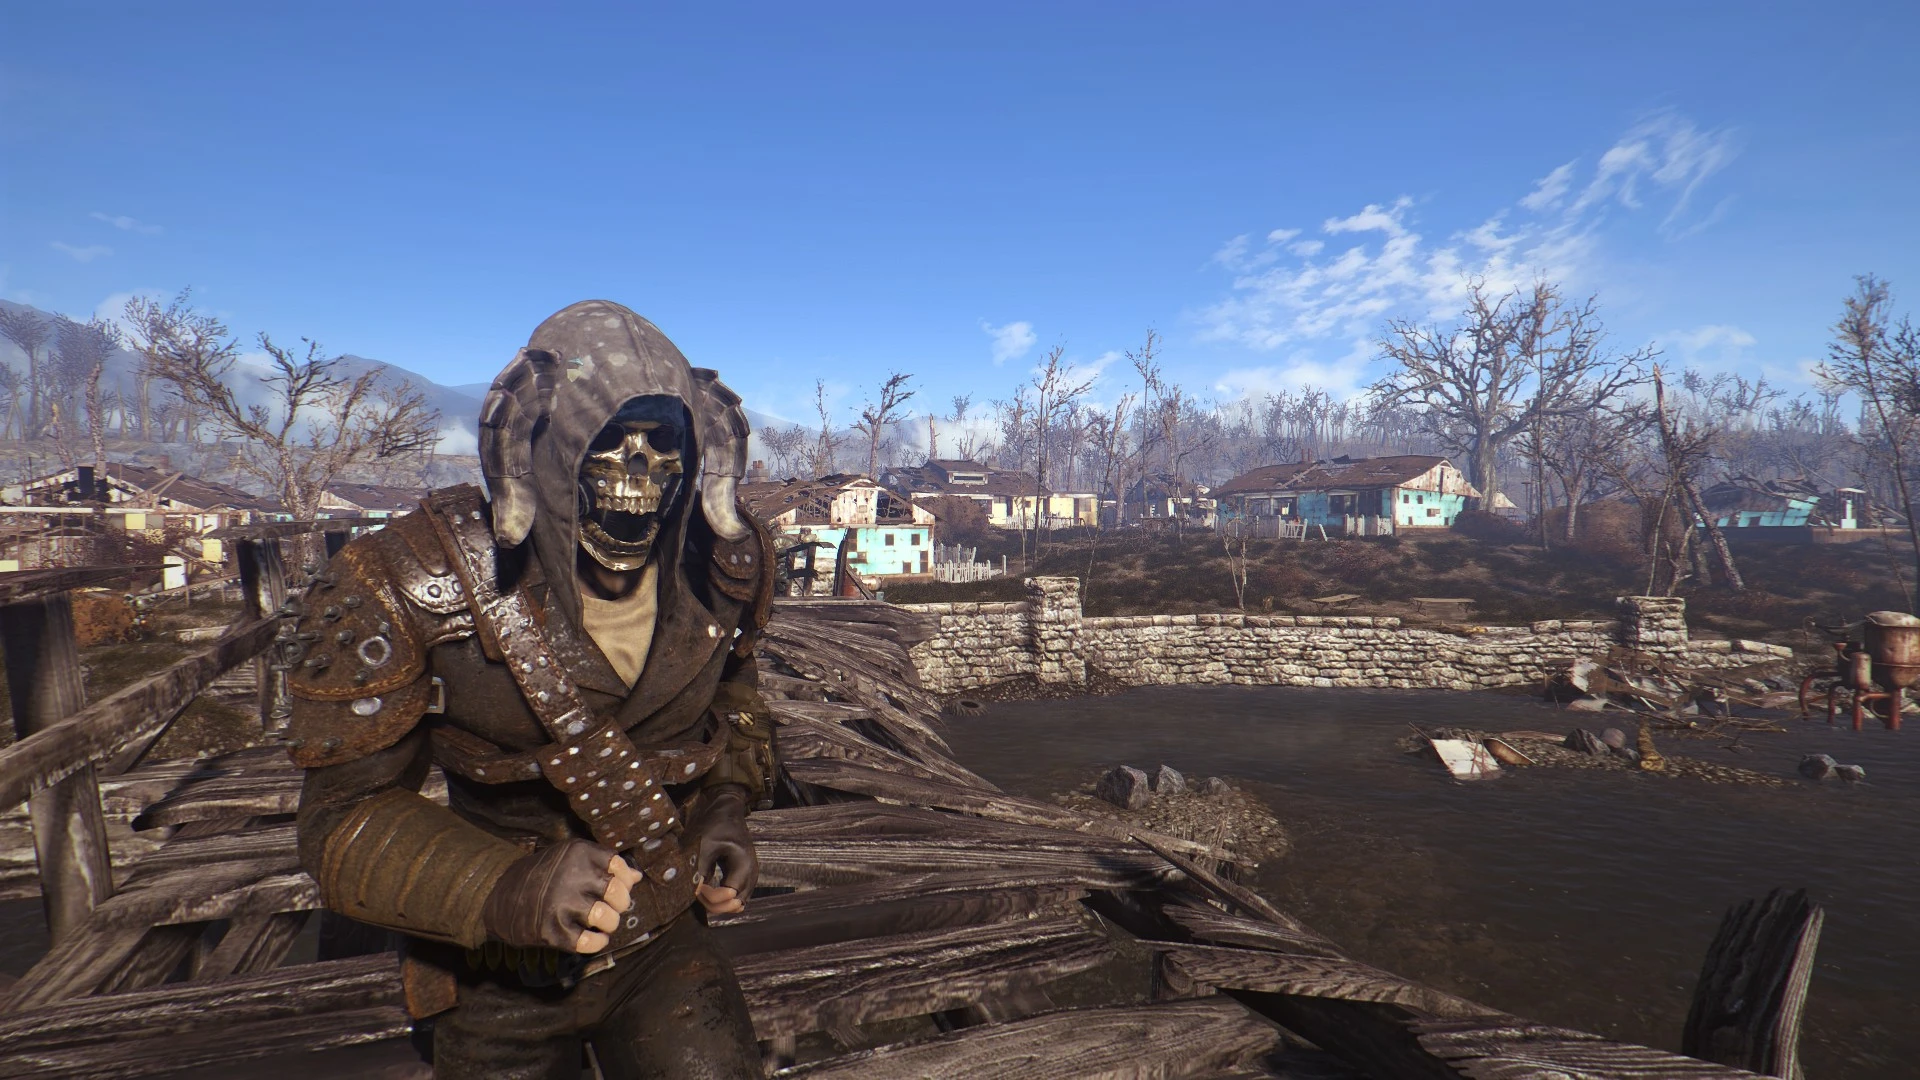 Armorsmith extended fallout 4